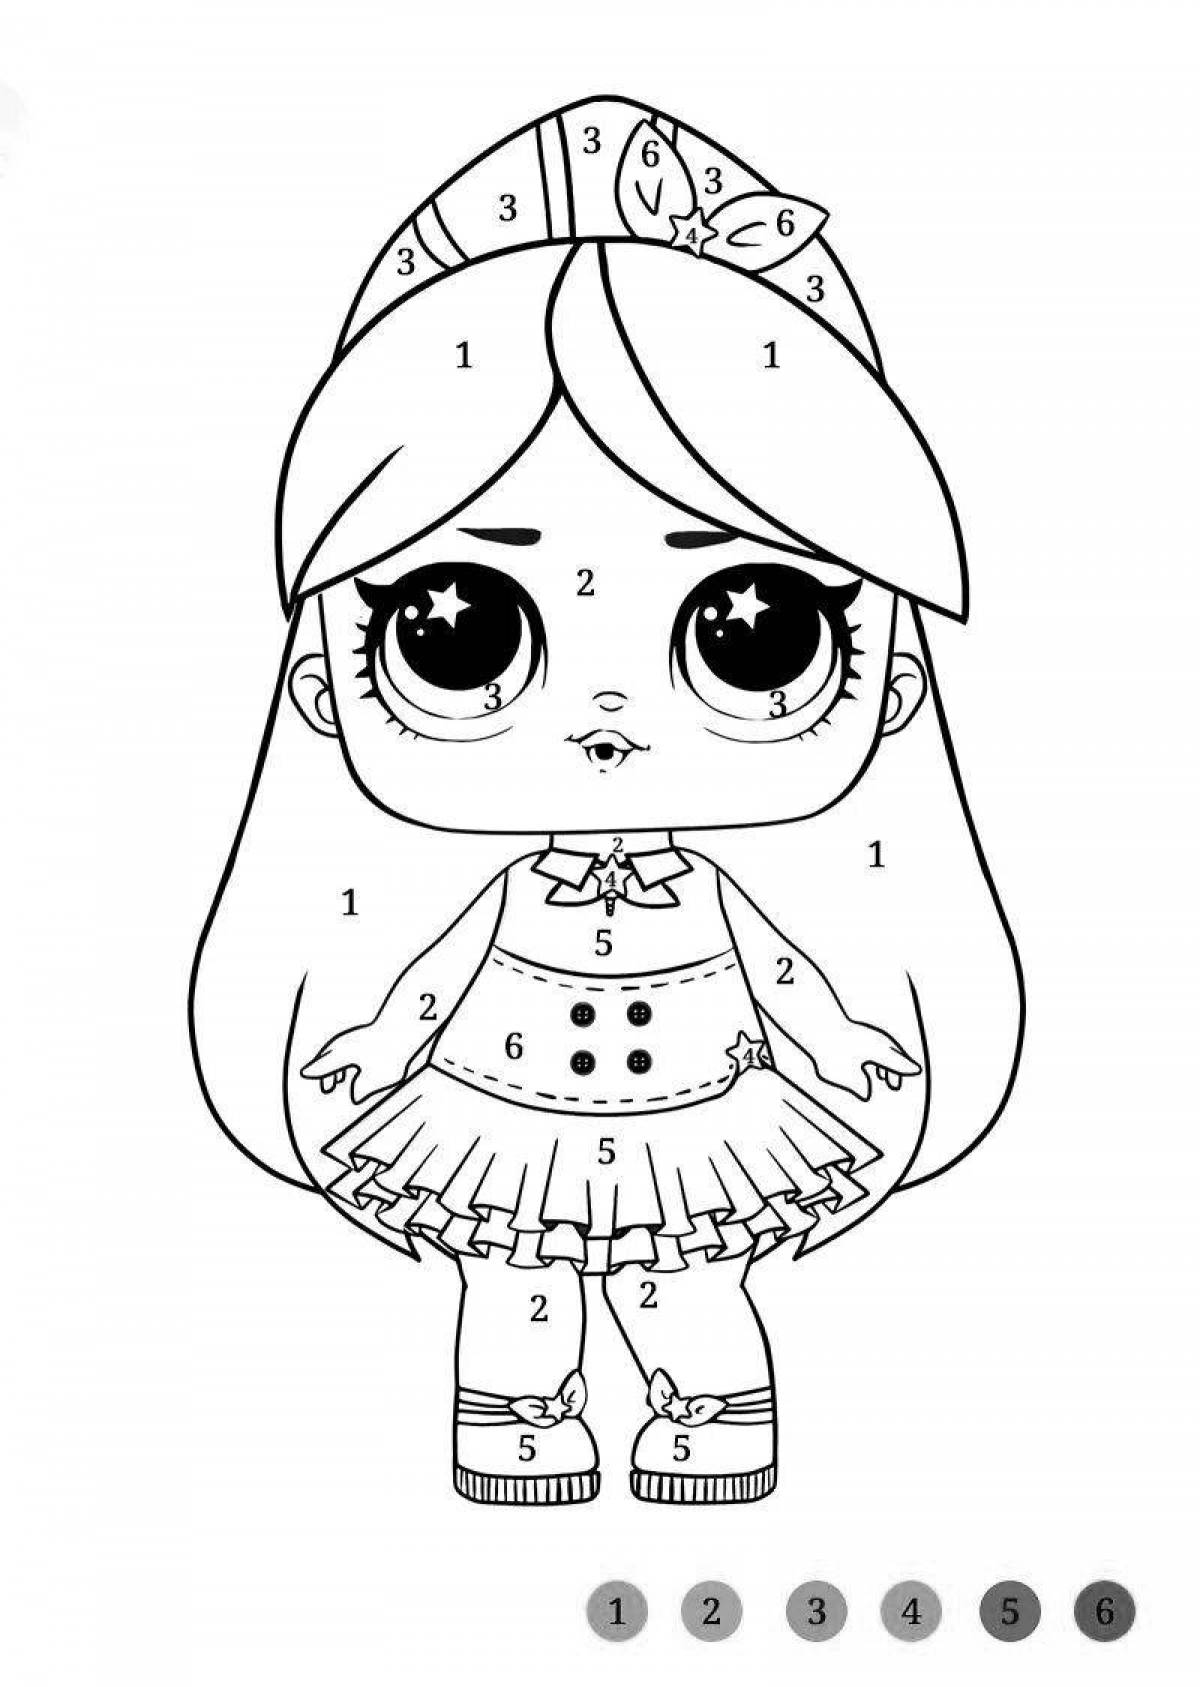 Marvelous coloring page doll lol figure